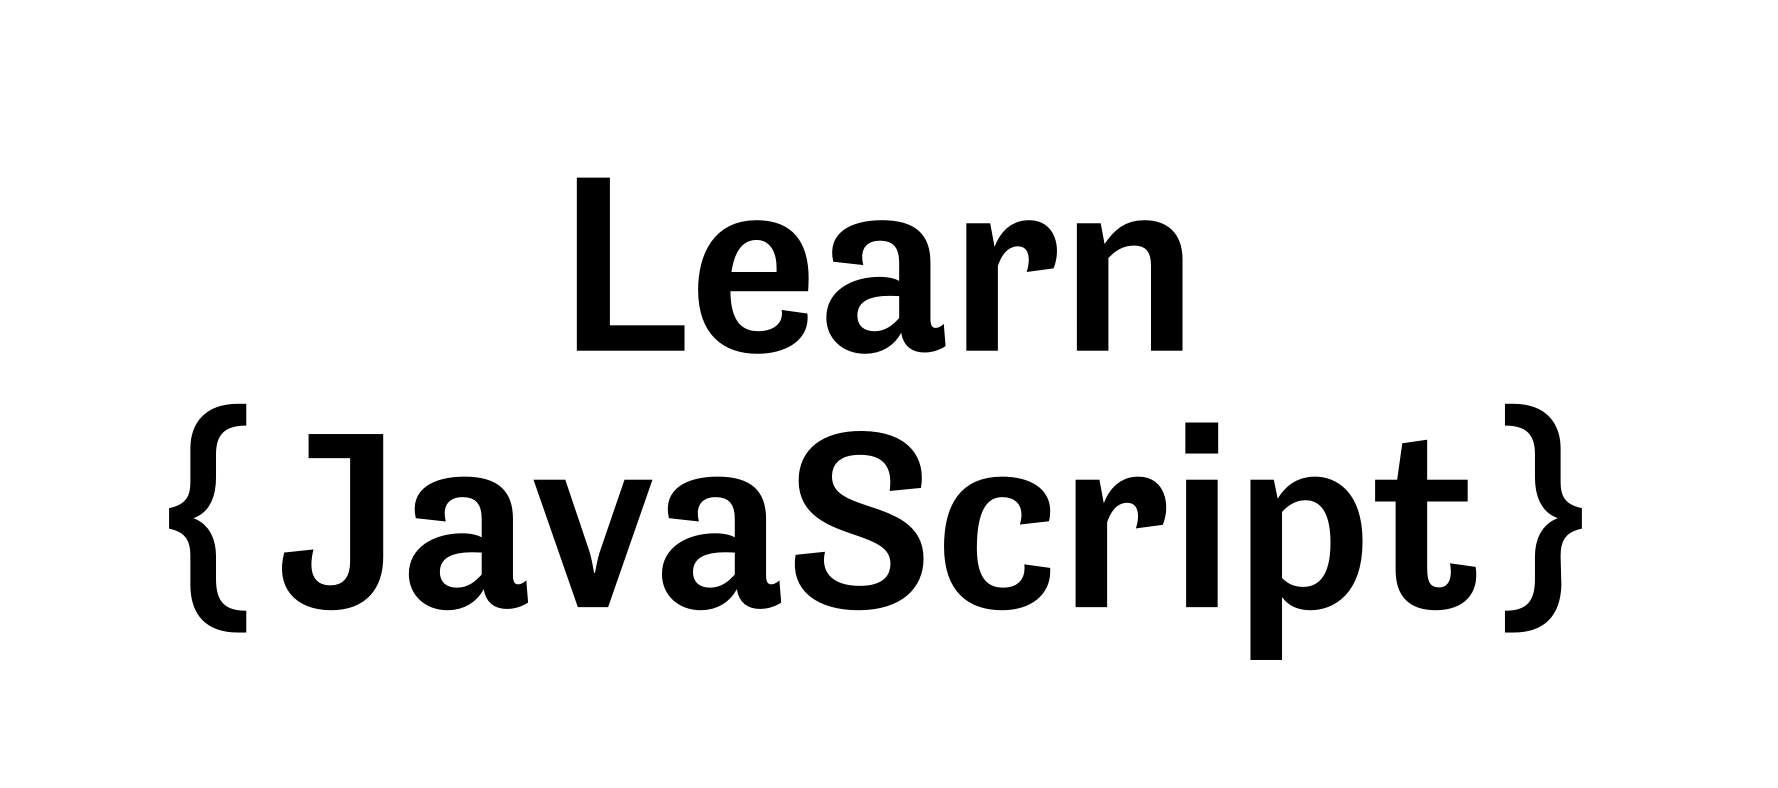 Learn JavaScript logo without animating text.